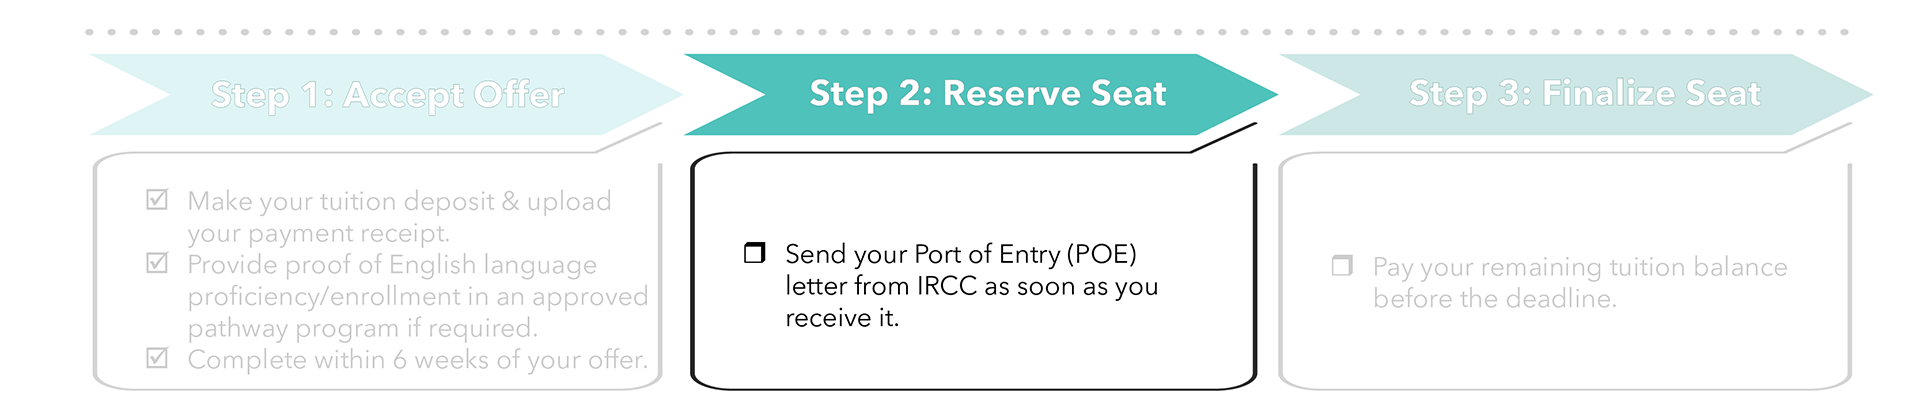 To reserve your seat, send your port of entry letter as soon as your receive it